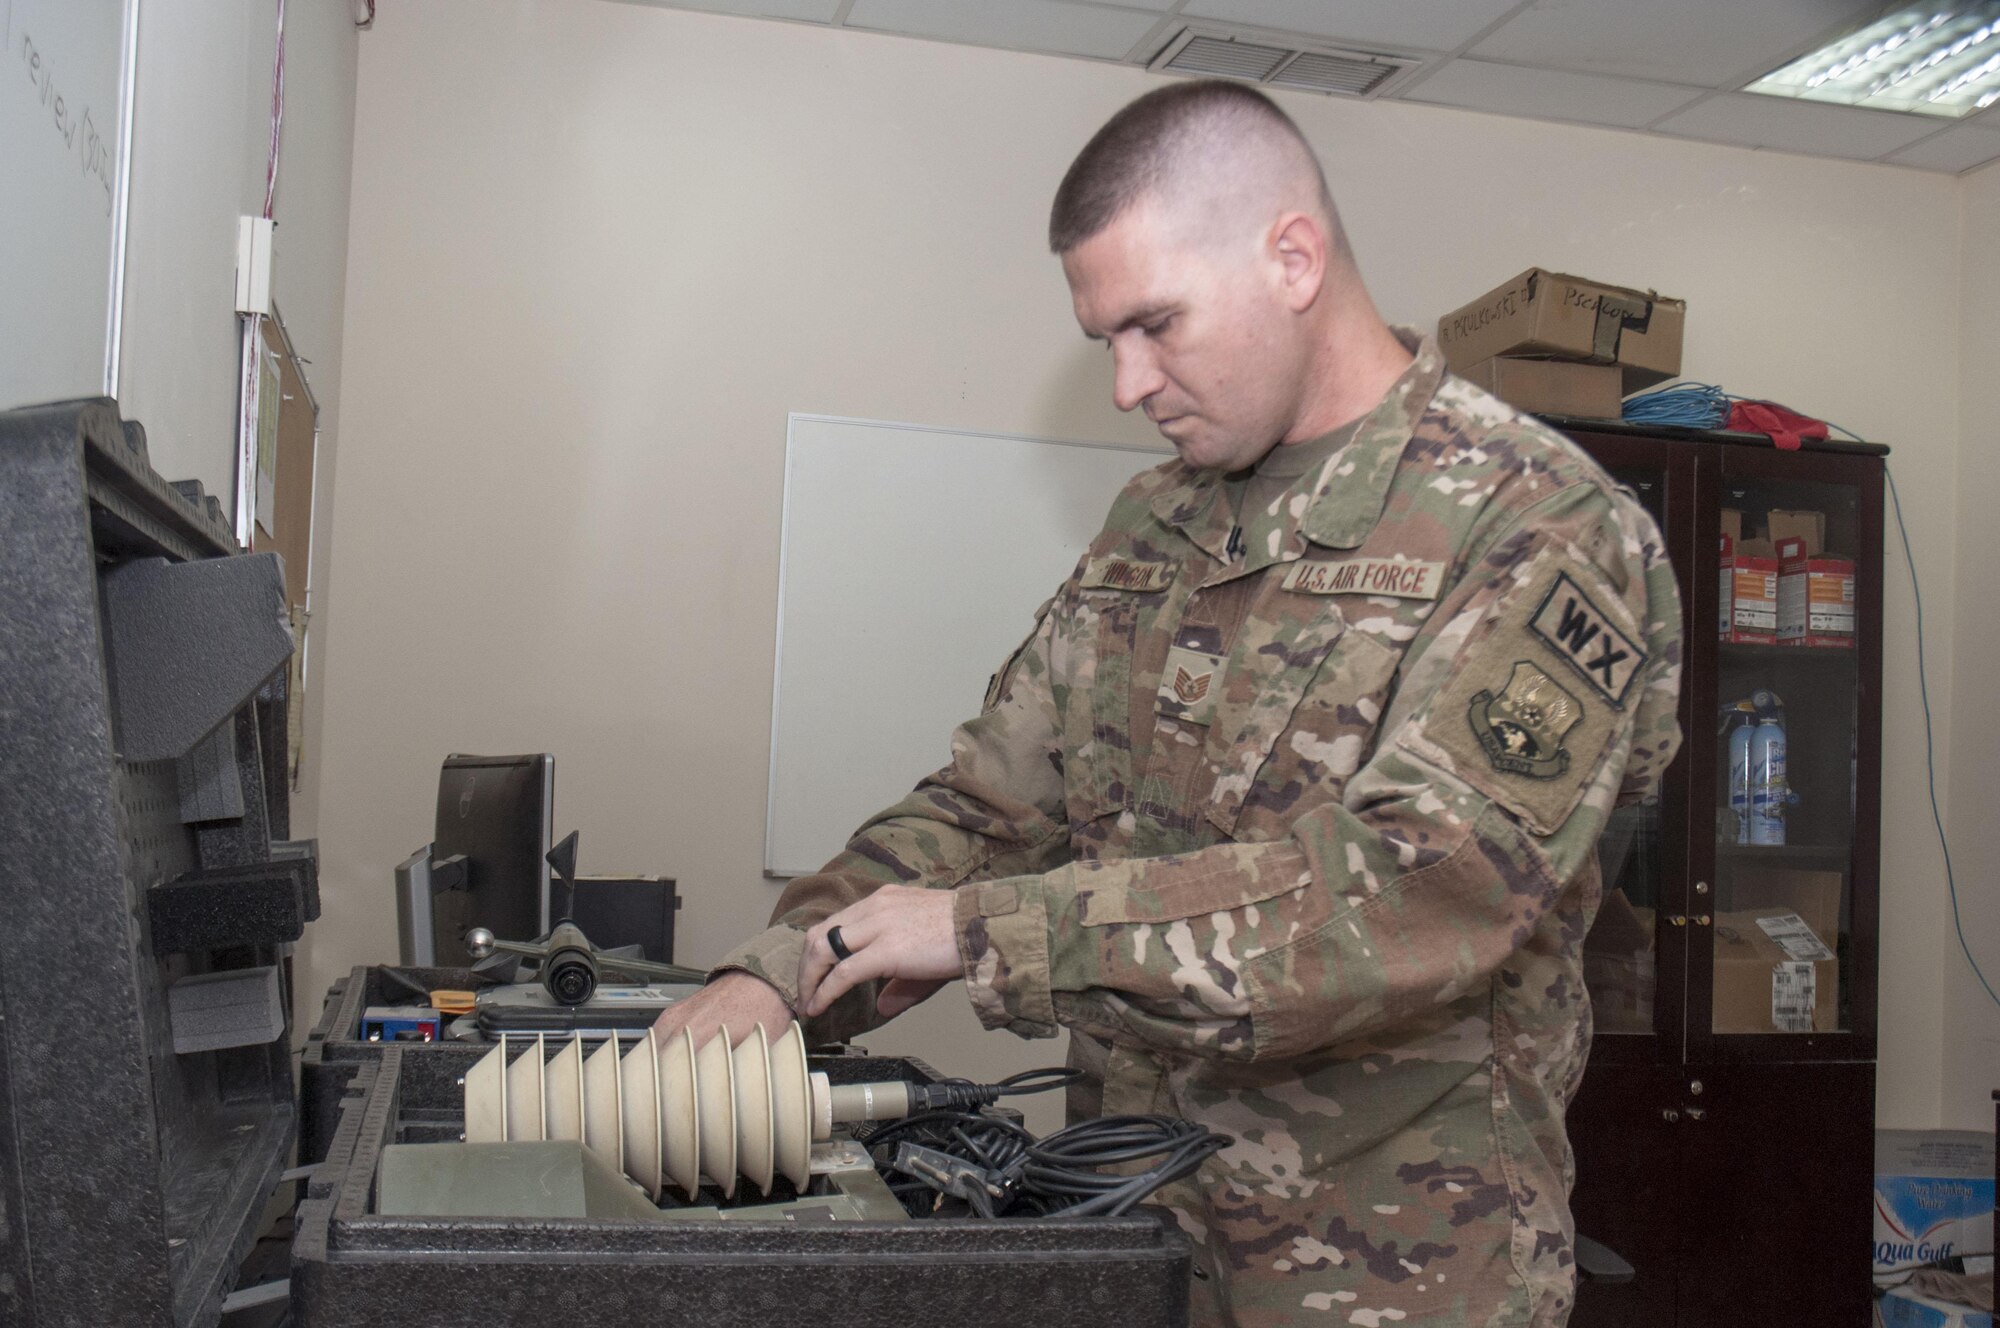 Tech. Sgt. Keith Wilson inspects the TMQ-53 tactical weather system at an undisclosed location in southwest Asia Sunday, June 11, 2017. Wilson uses this and other equipment to provide constant weather updates in support of a wide array of base operations. (U.S. Air Force photo/Master Sgt. Eric M. Sharman)